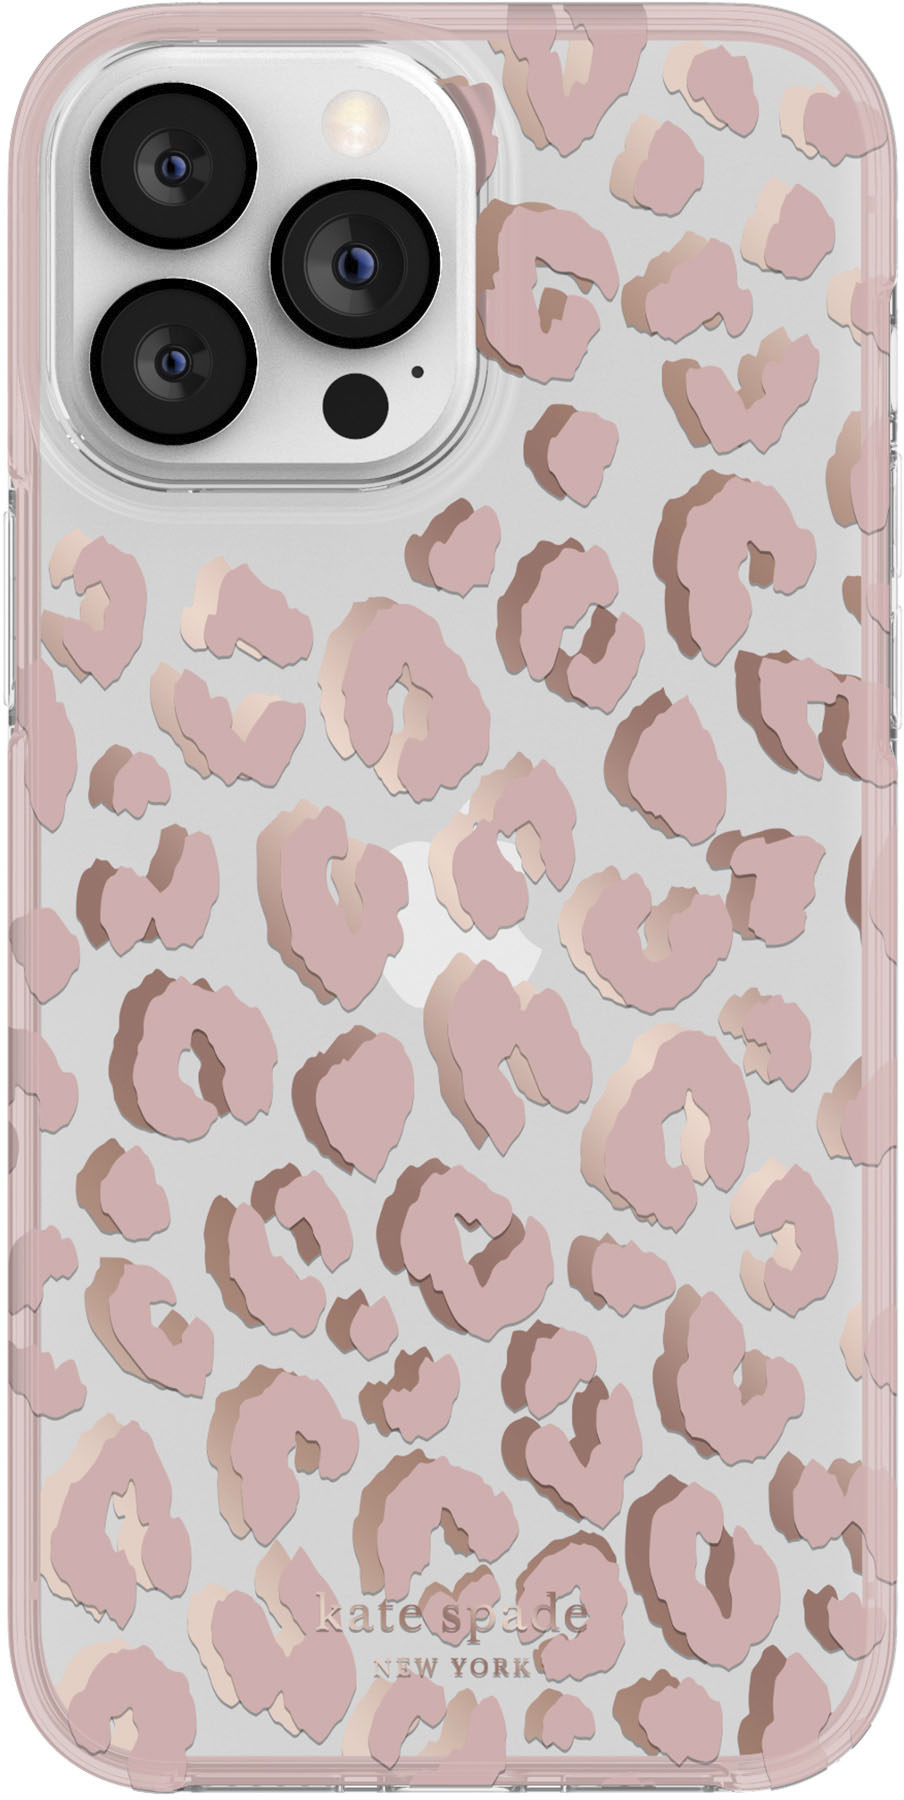 kate spade new york - Protective Hardshell Case for iPhone 13/12 Pro Max -  Leopard Pink